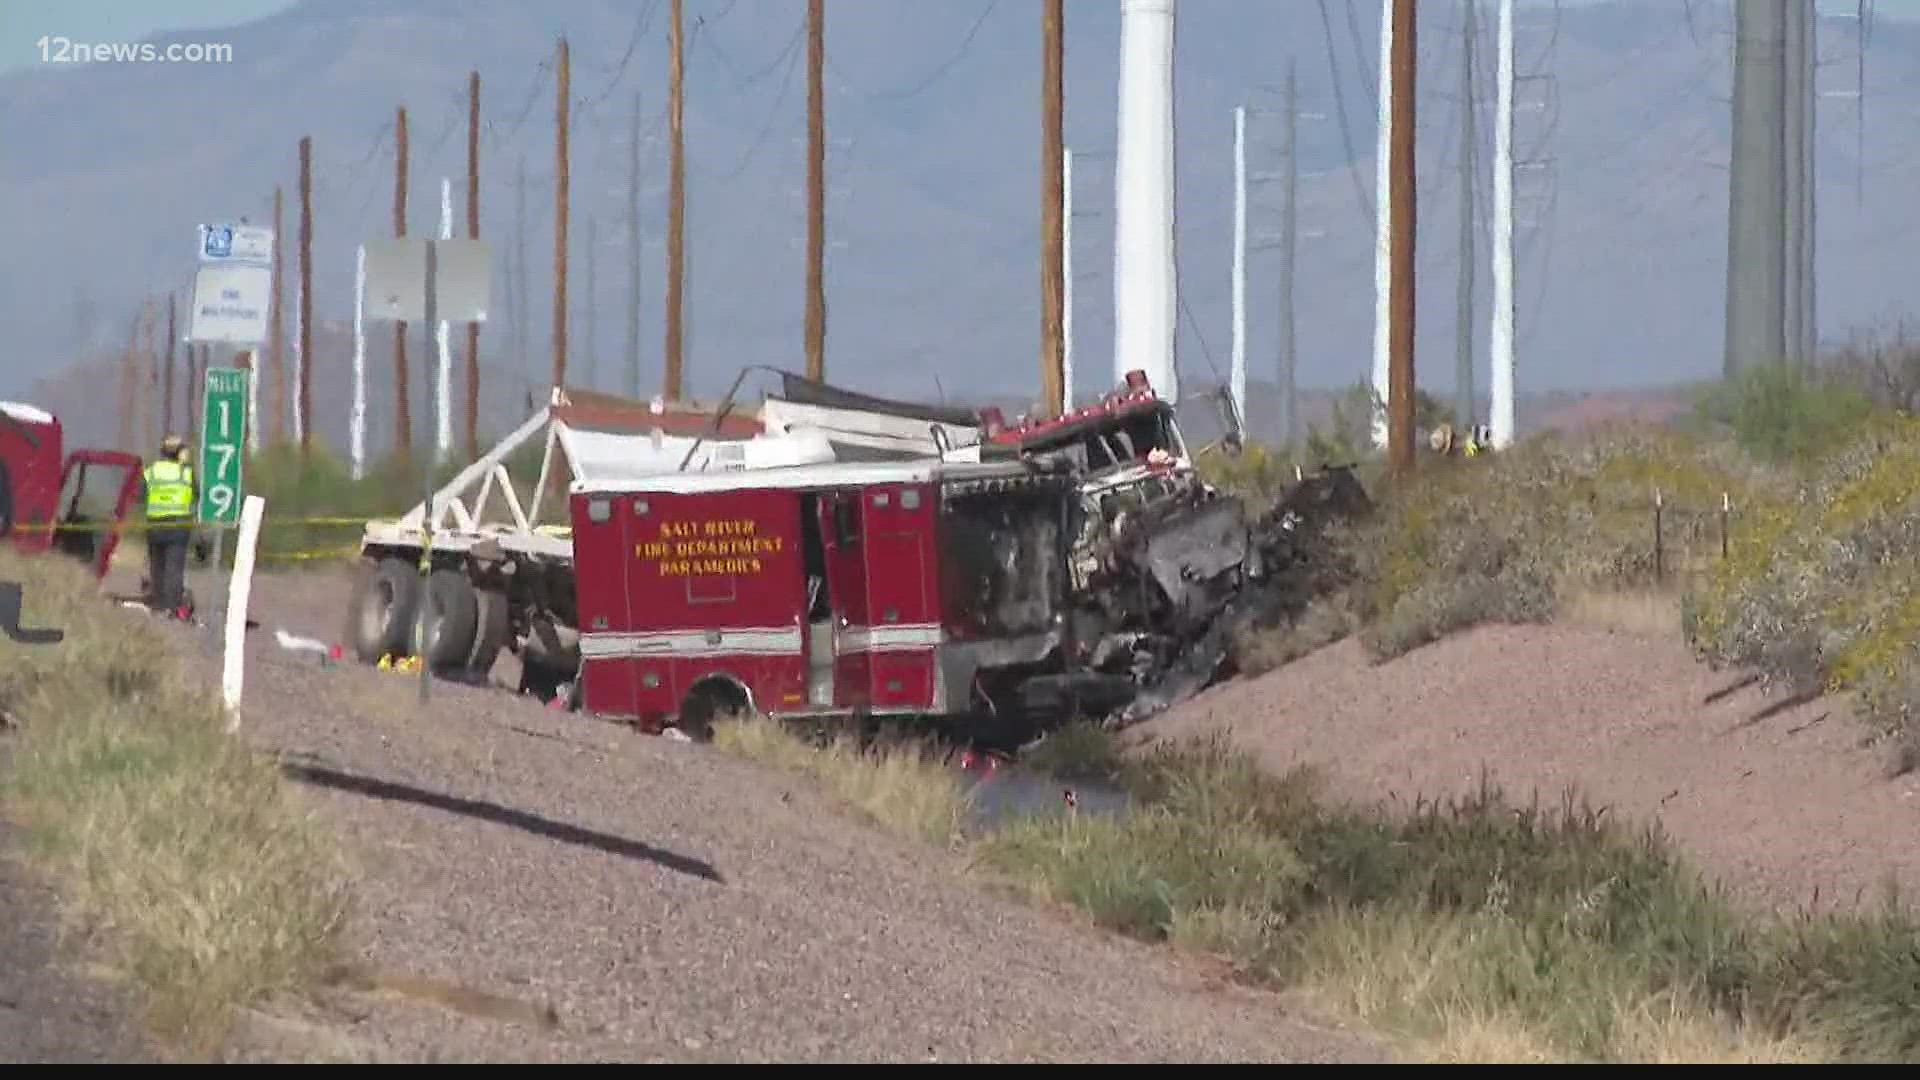 The firefighter/EMT died and another paramedic was seriously injured when the ambulance they were riding in collided with a semi-truck.